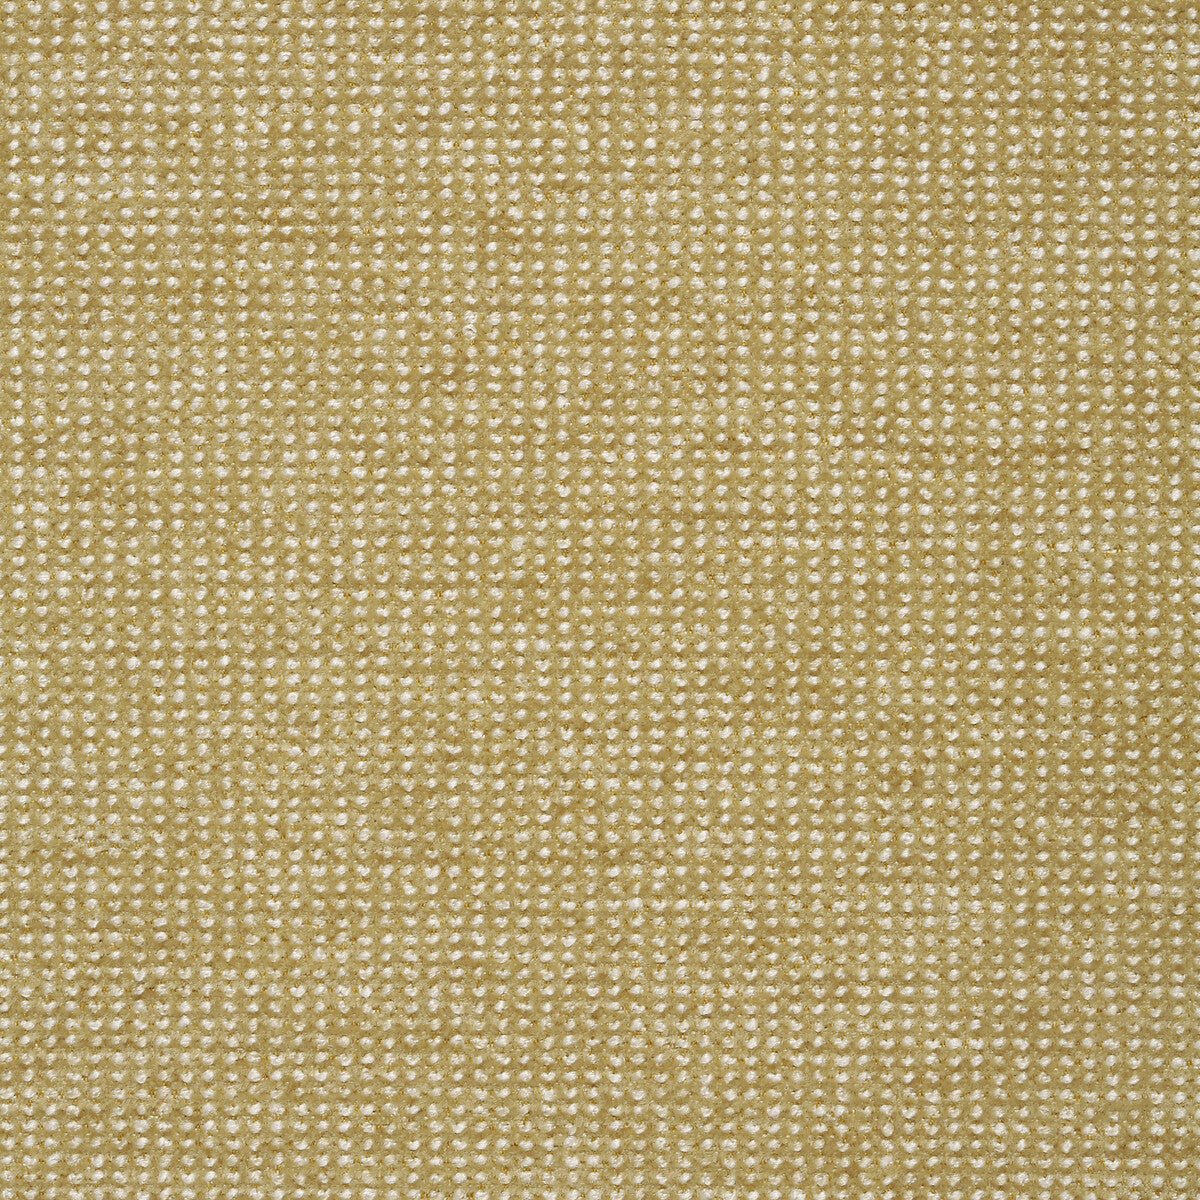 Kravet Contract fabric in 35116-14 color - pattern 35116.14.0 - by Kravet Contract in the Crypton Incase collection